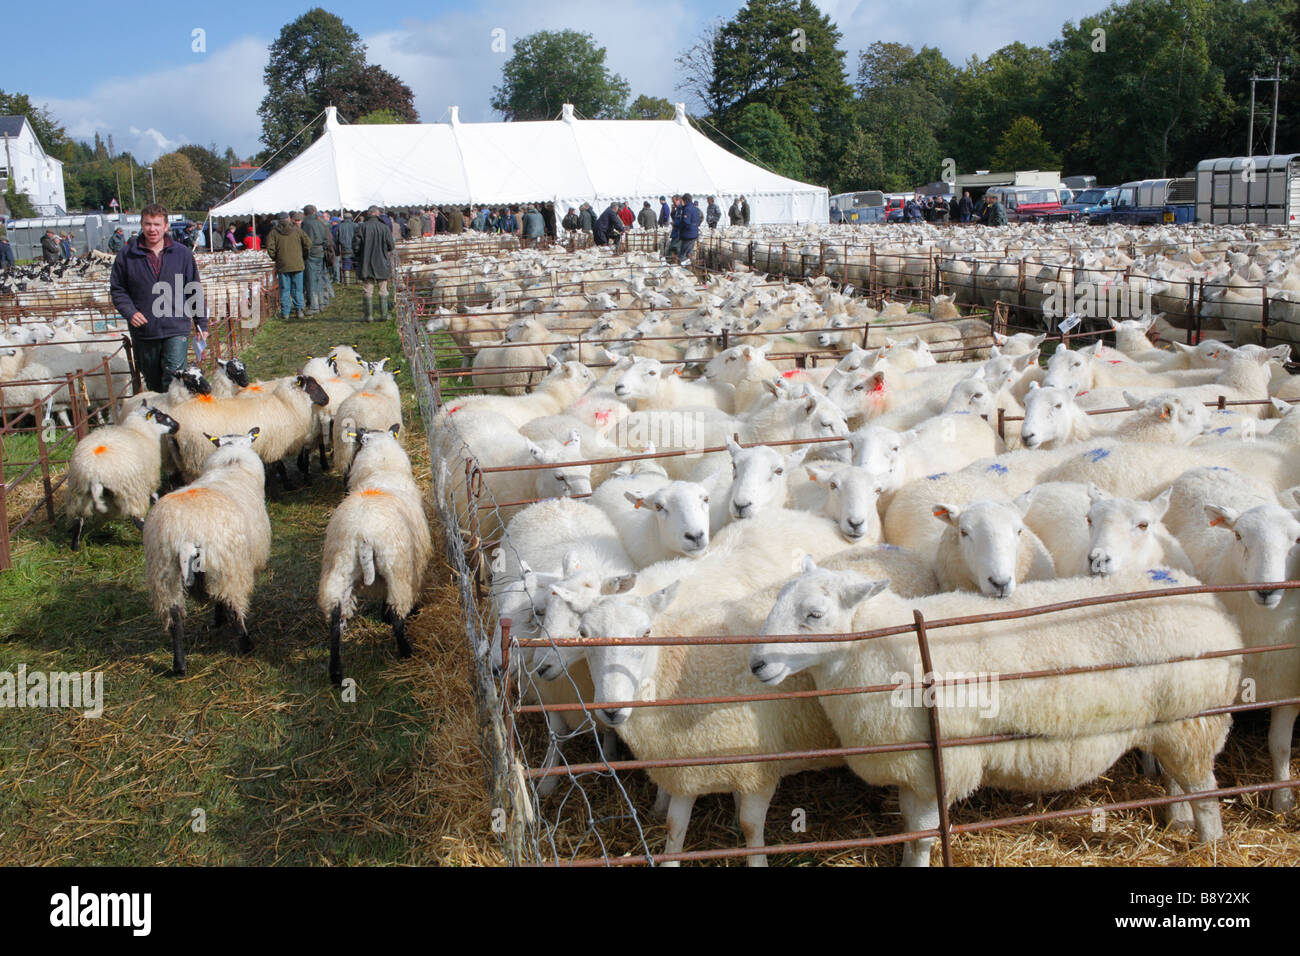 Welsh mountain ewes awaiting sale at a breeding sheep fair. Llanidloes, Powys, Wales. October 2008 Stock Photo